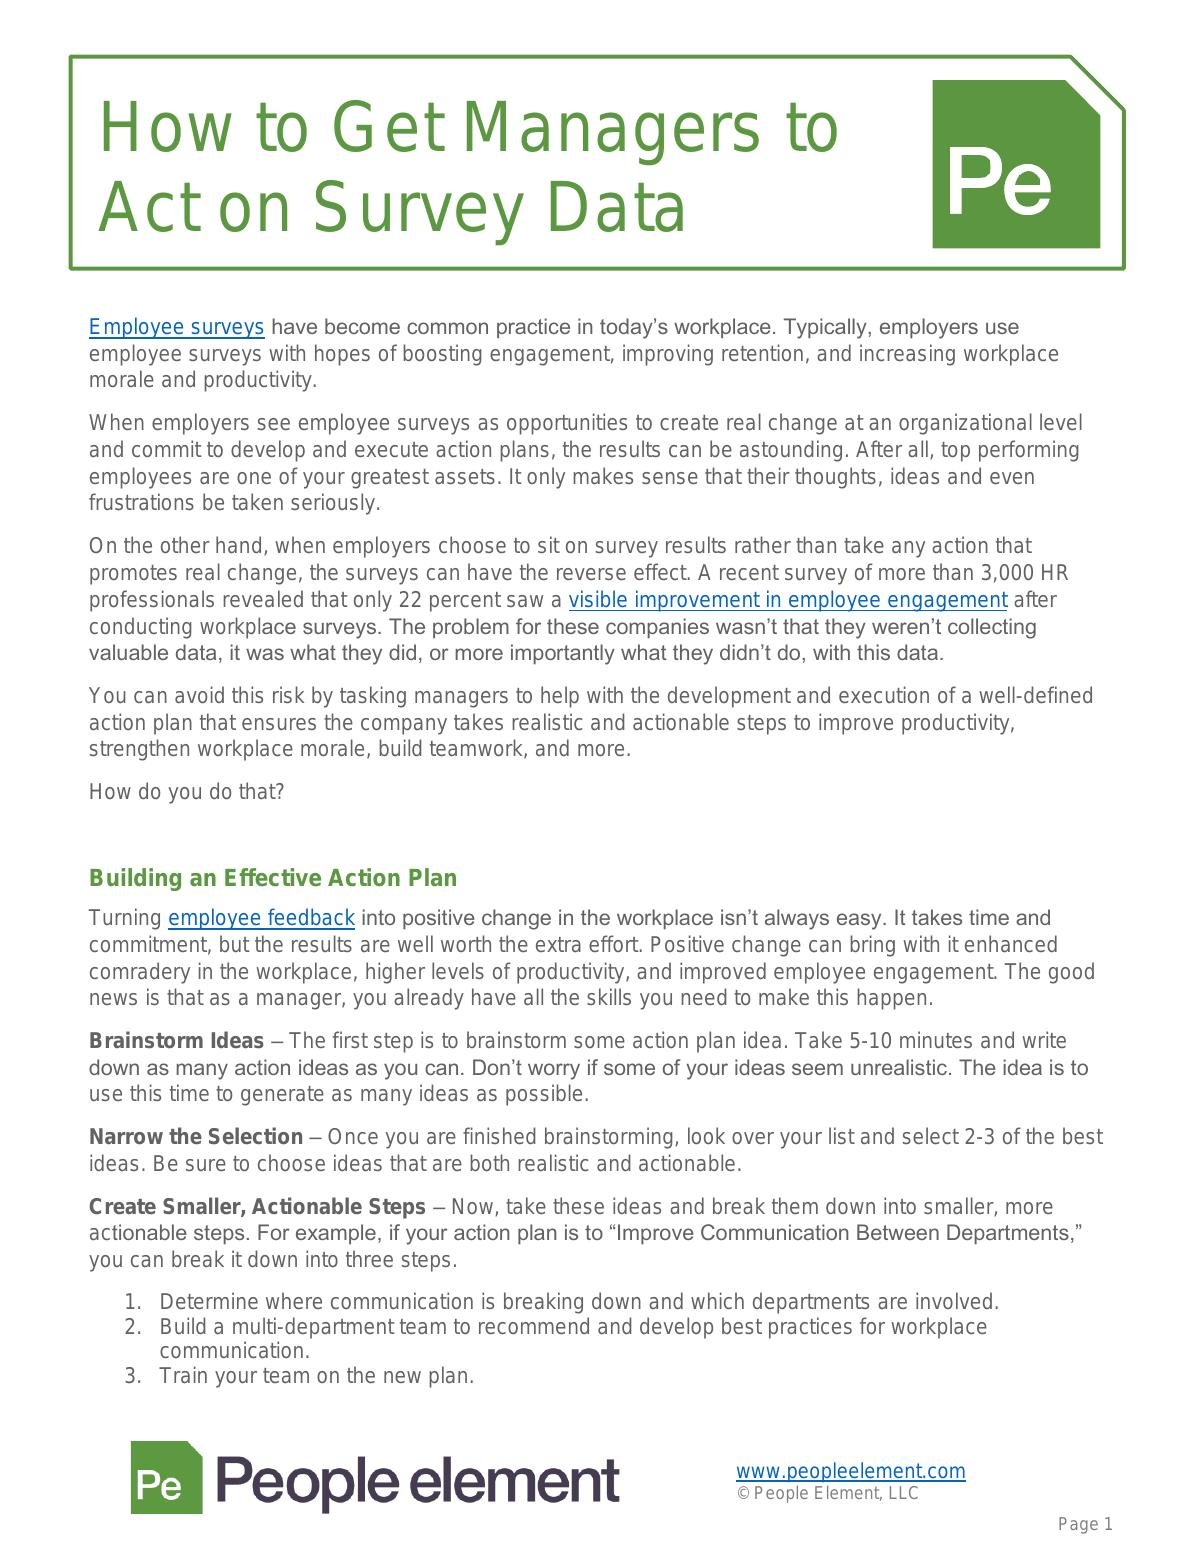 How to Get Managers to Act on Survey Data